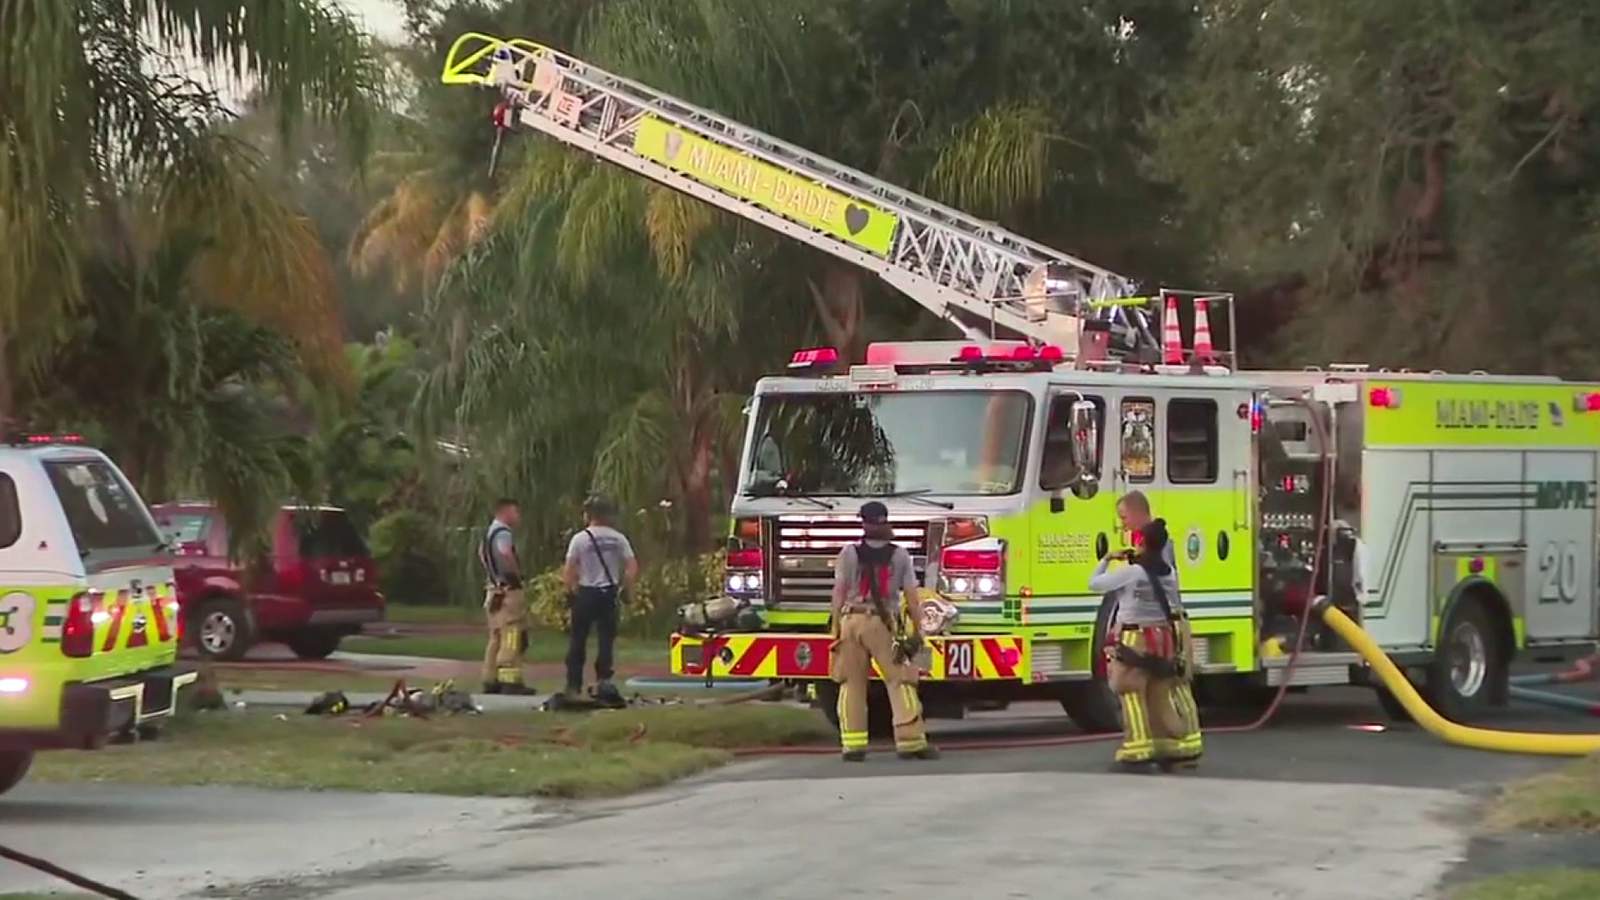 Detectives find man's body as they investigate 2 house fires